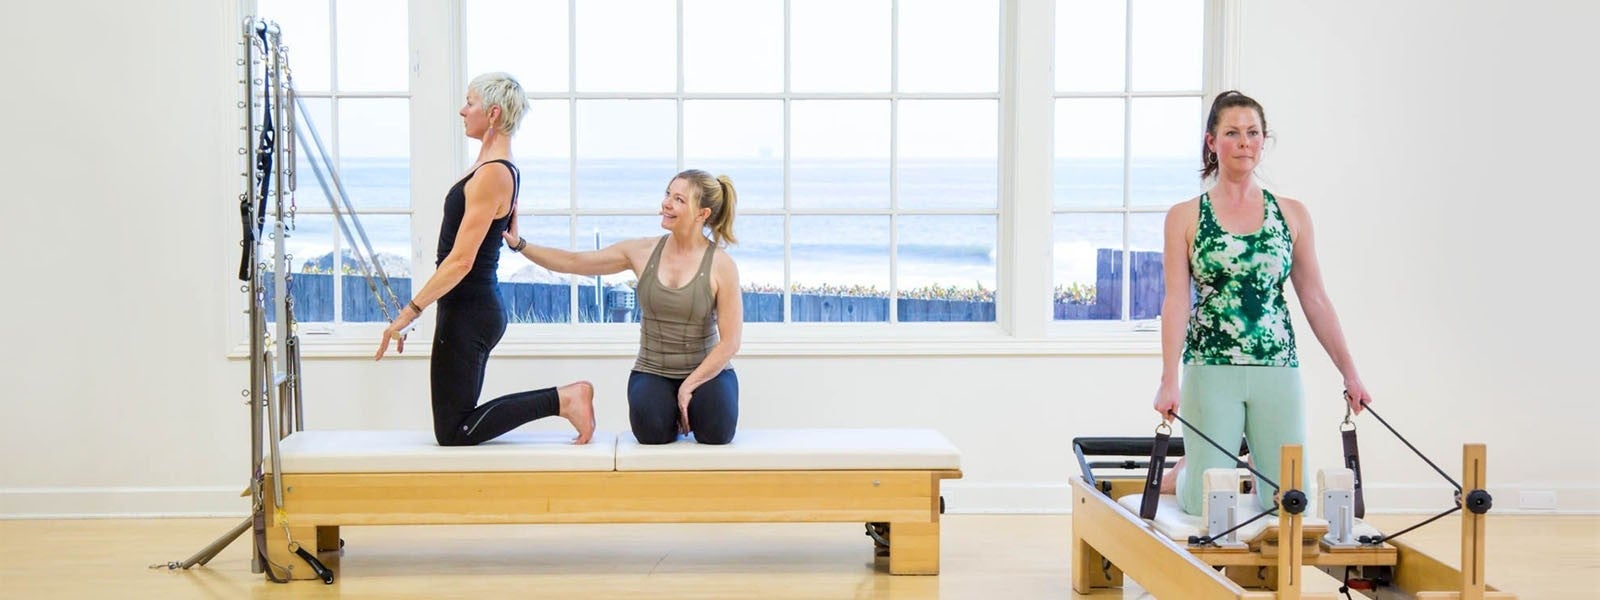 Club Pilates Teacher Training - Supportive or Not Worth It? : r/pilates